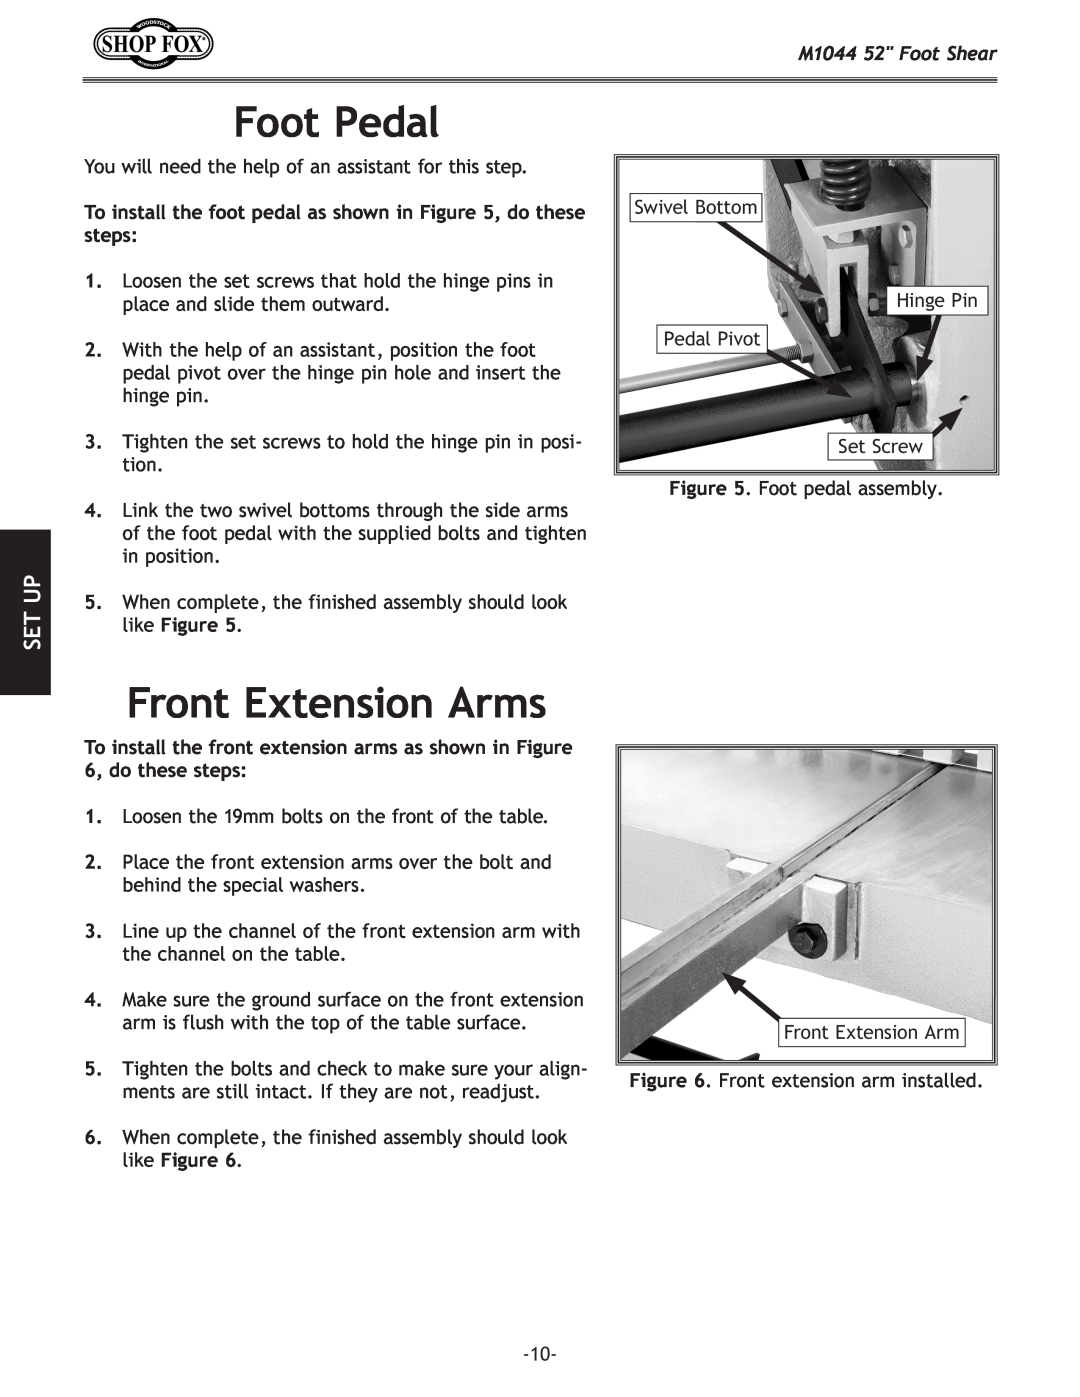 Woodstock M1044 manual Foot Pedal, Front Extension Arms, To install the foot pedal as shown in , do these steps, Set Up 